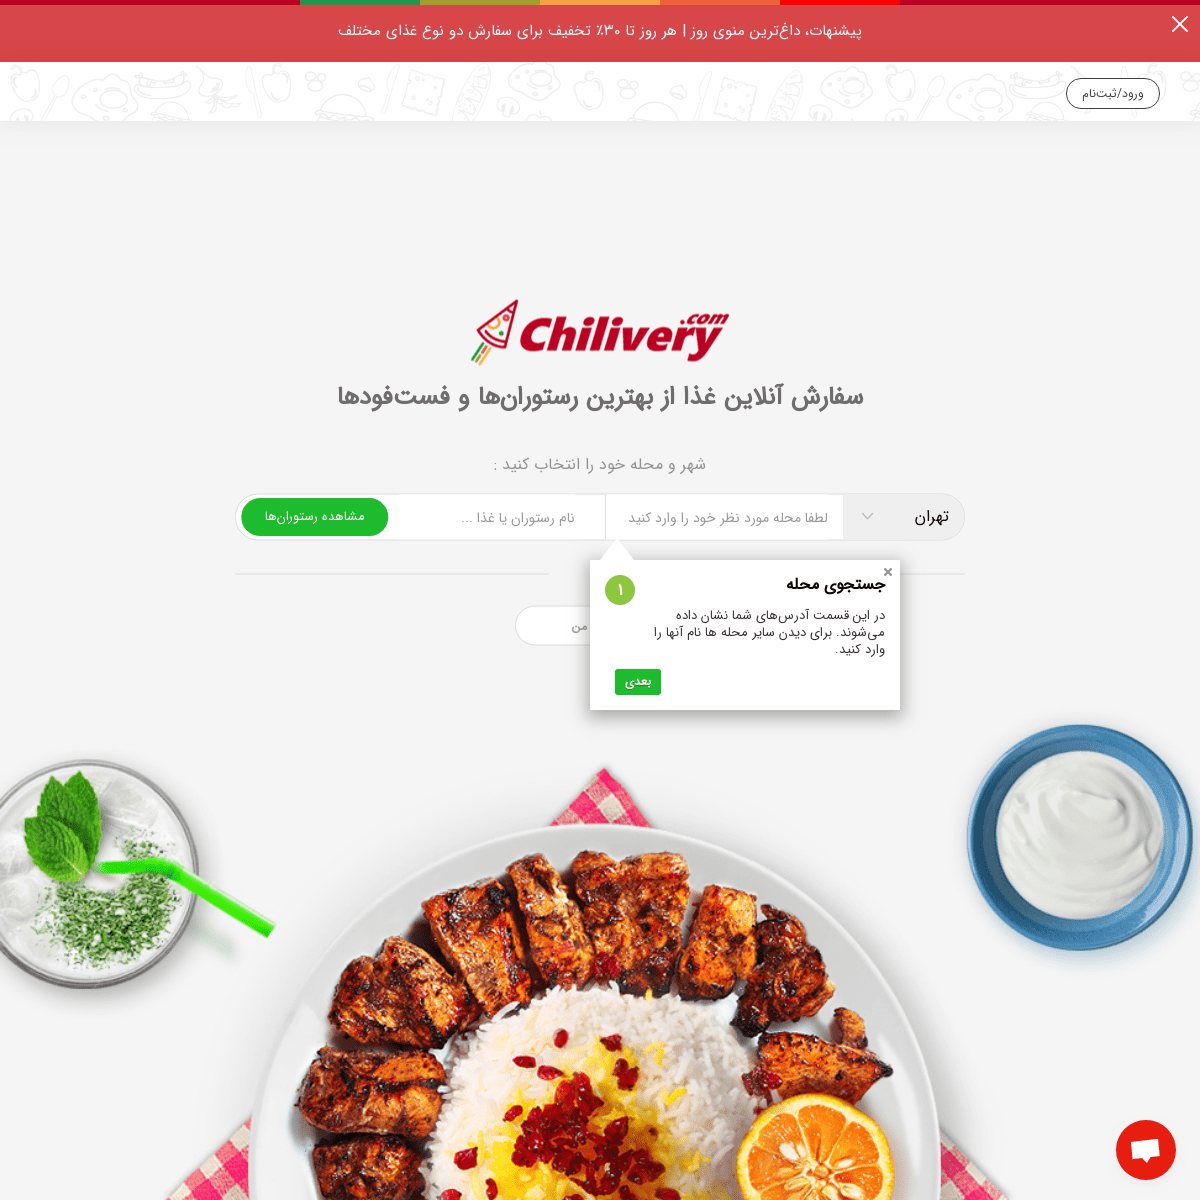 A complete backup of chilivery.com